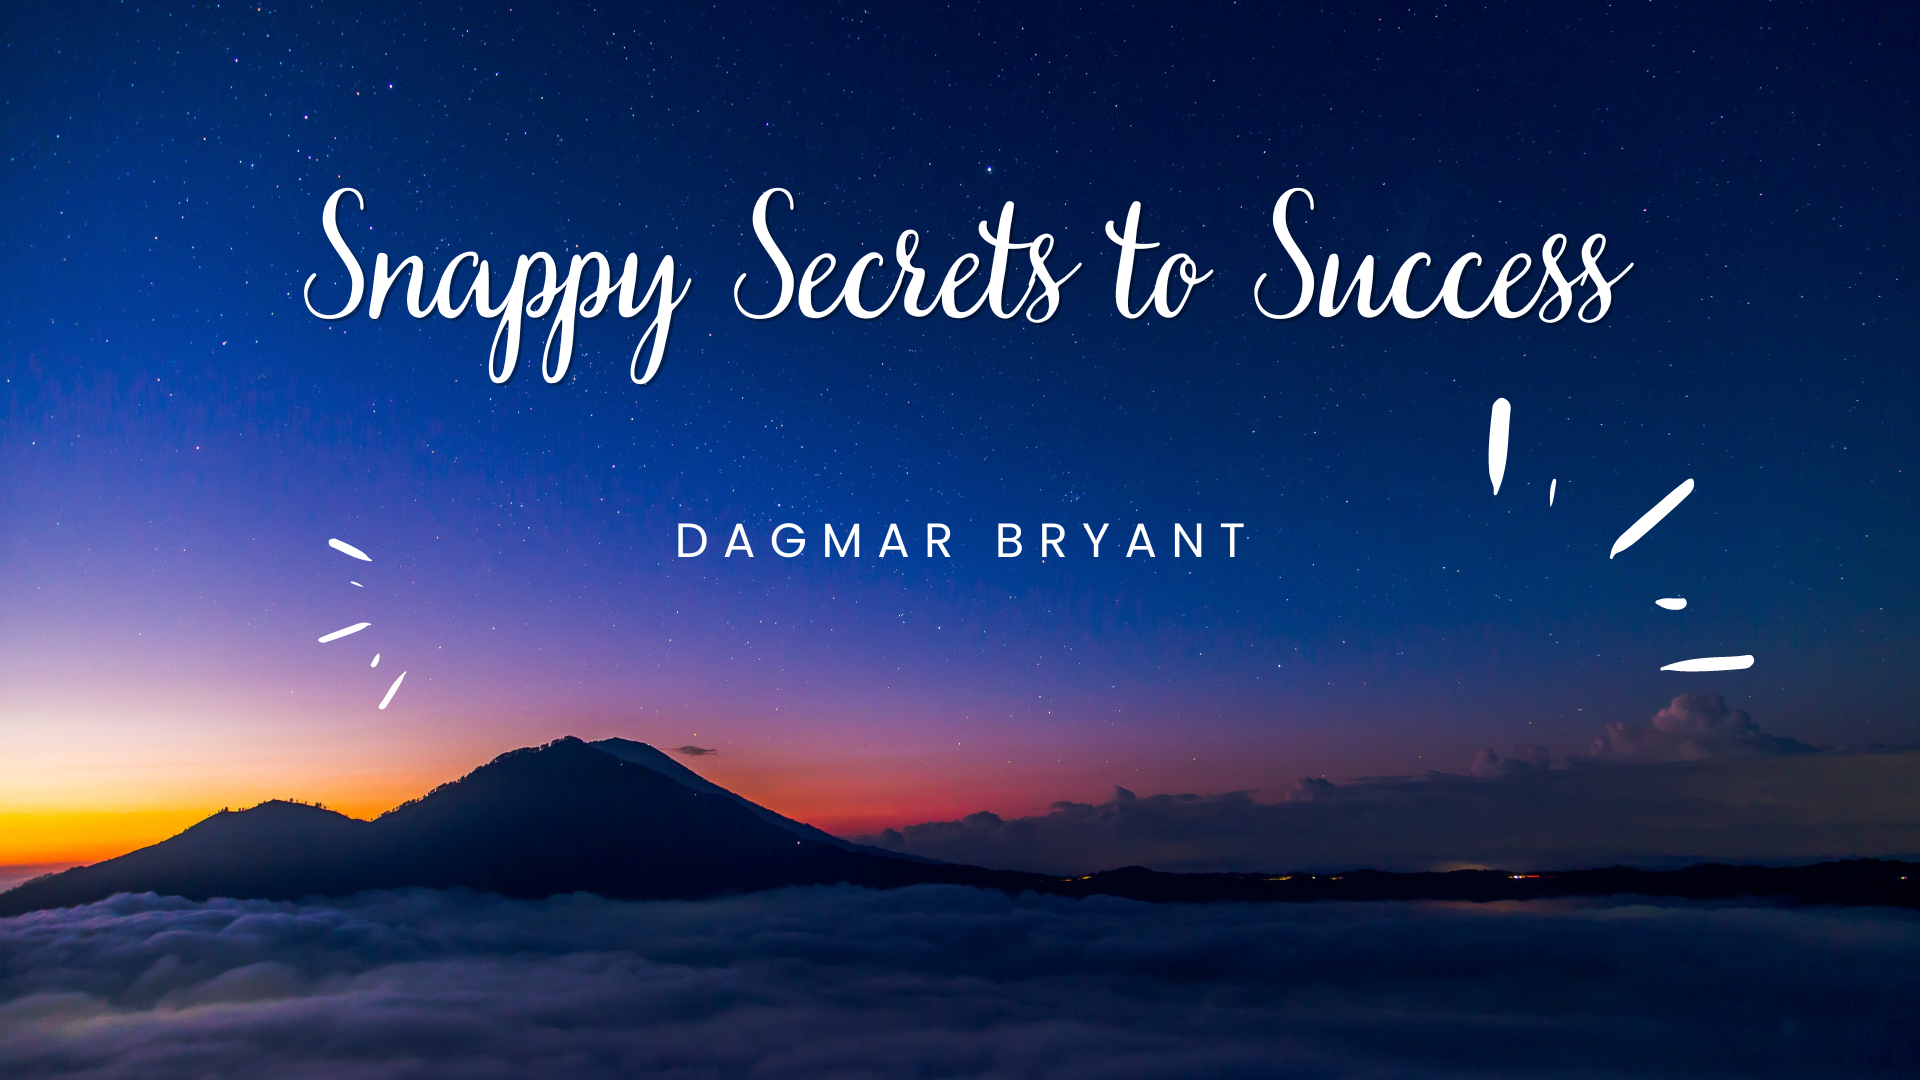 Snappy Secrets to Success Episode 1: Try